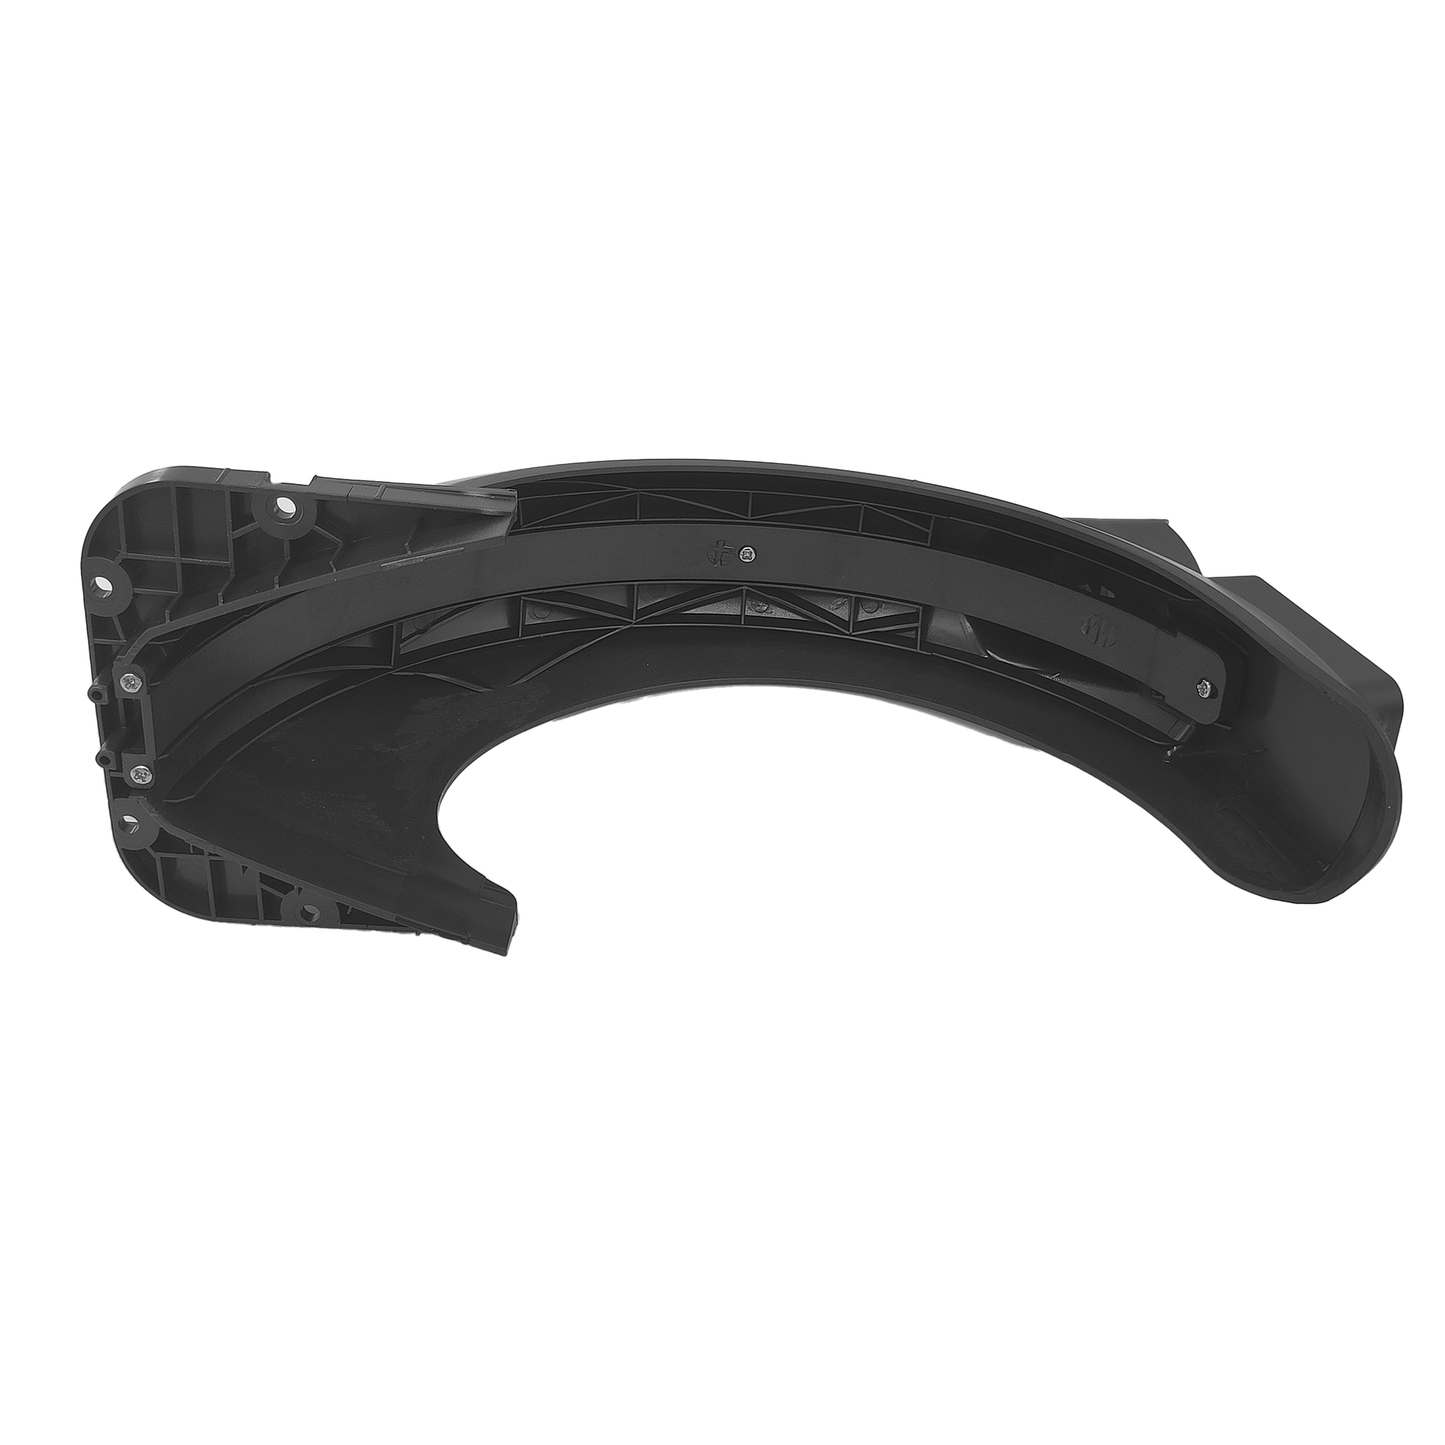 Mudguard without taillight for Ninebot MaxG30D aftermarket